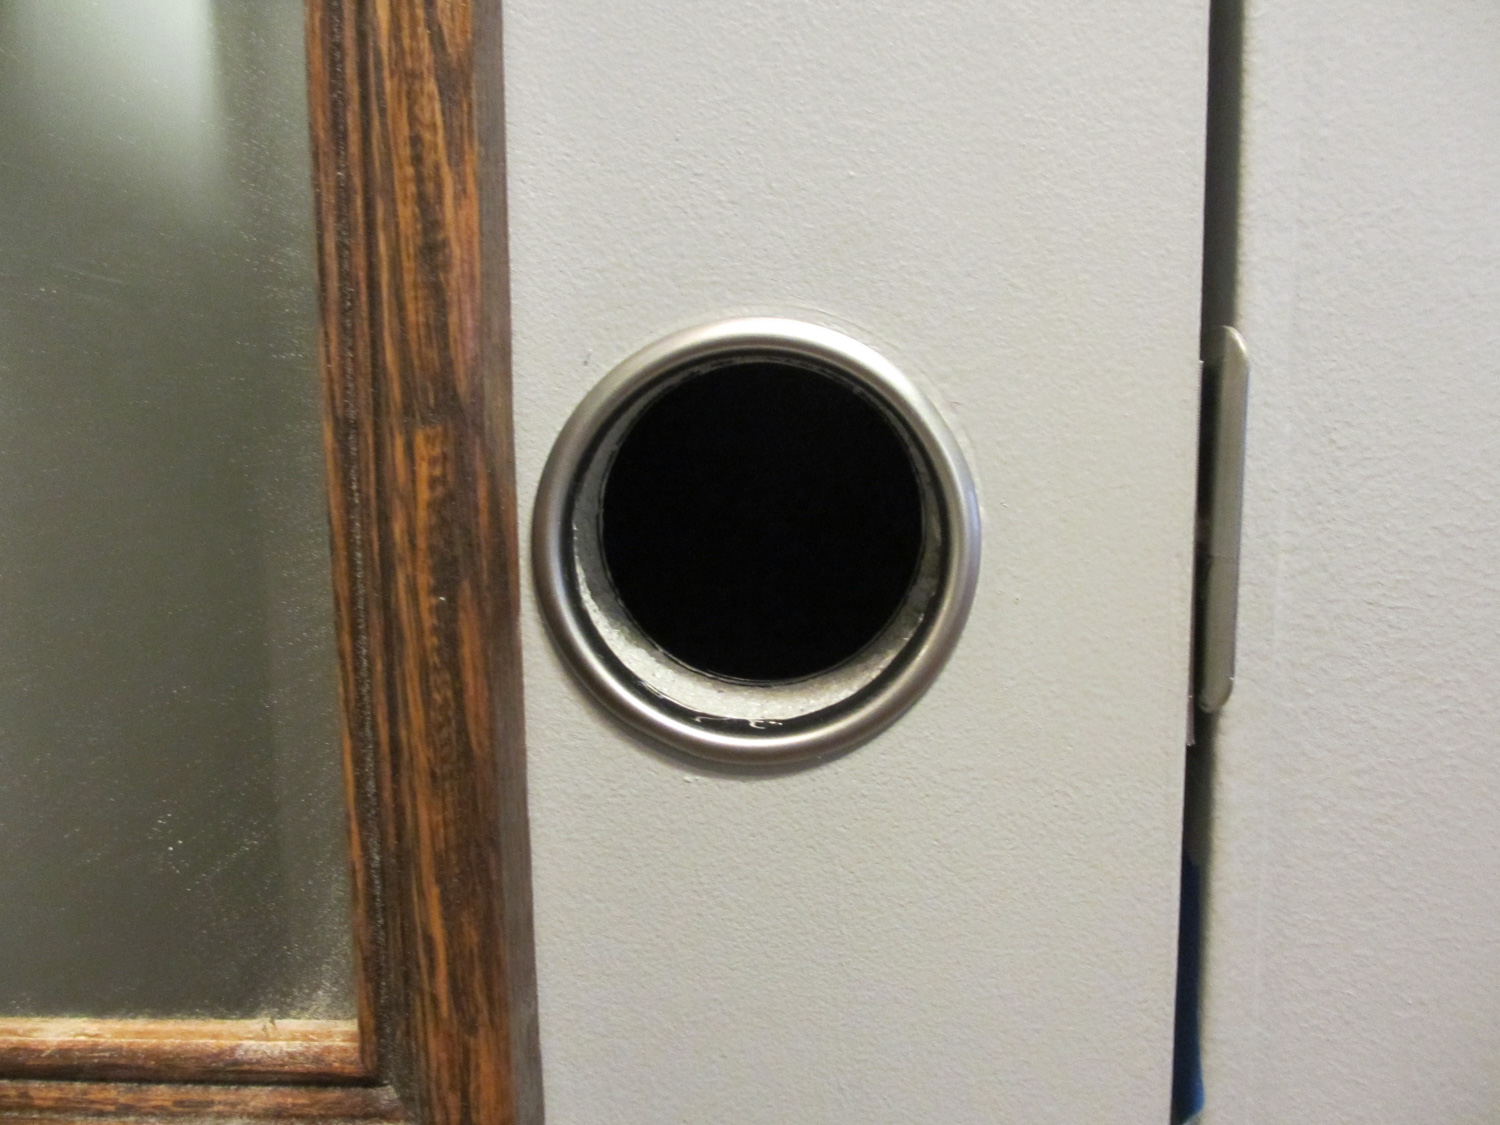  We decided to not install a standard doorknob on our closet door. Instead we have a "finger hole". This opens up the space in the hallway. 